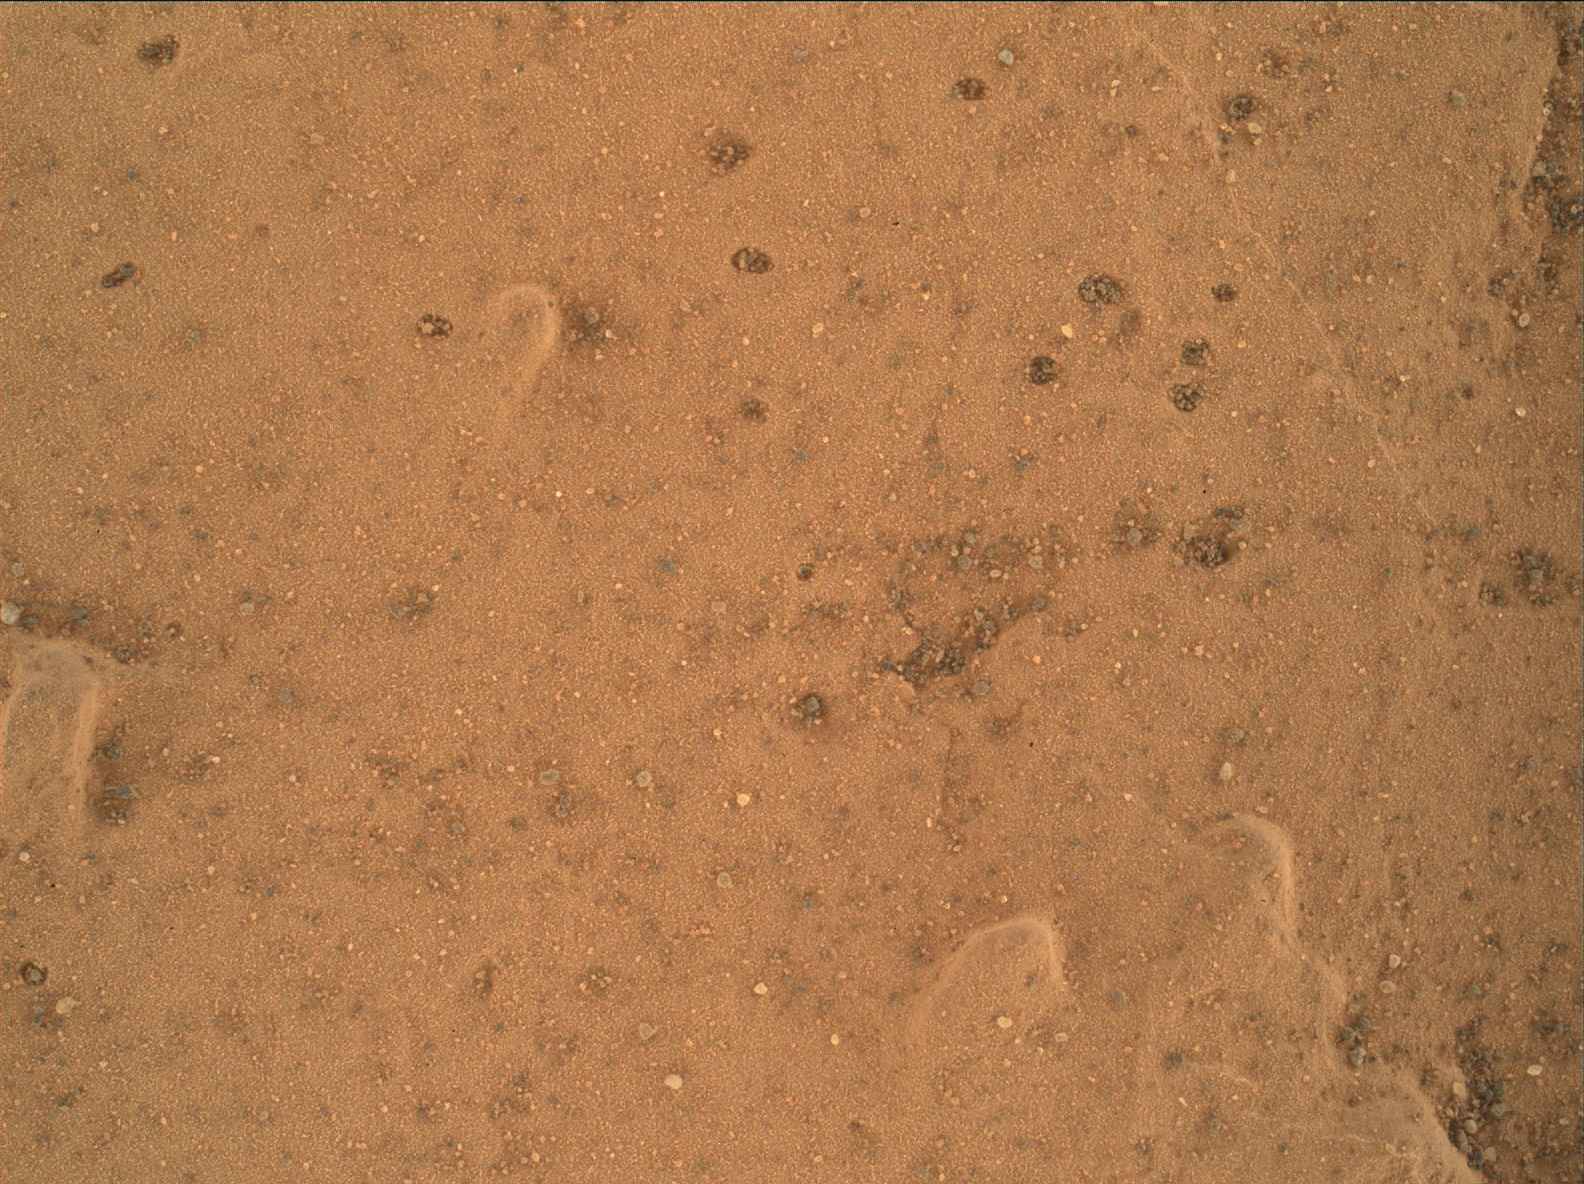 Nasa's Mars rover Curiosity acquired this image using its Mars Hand Lens Imager (MAHLI) on Sol 1809